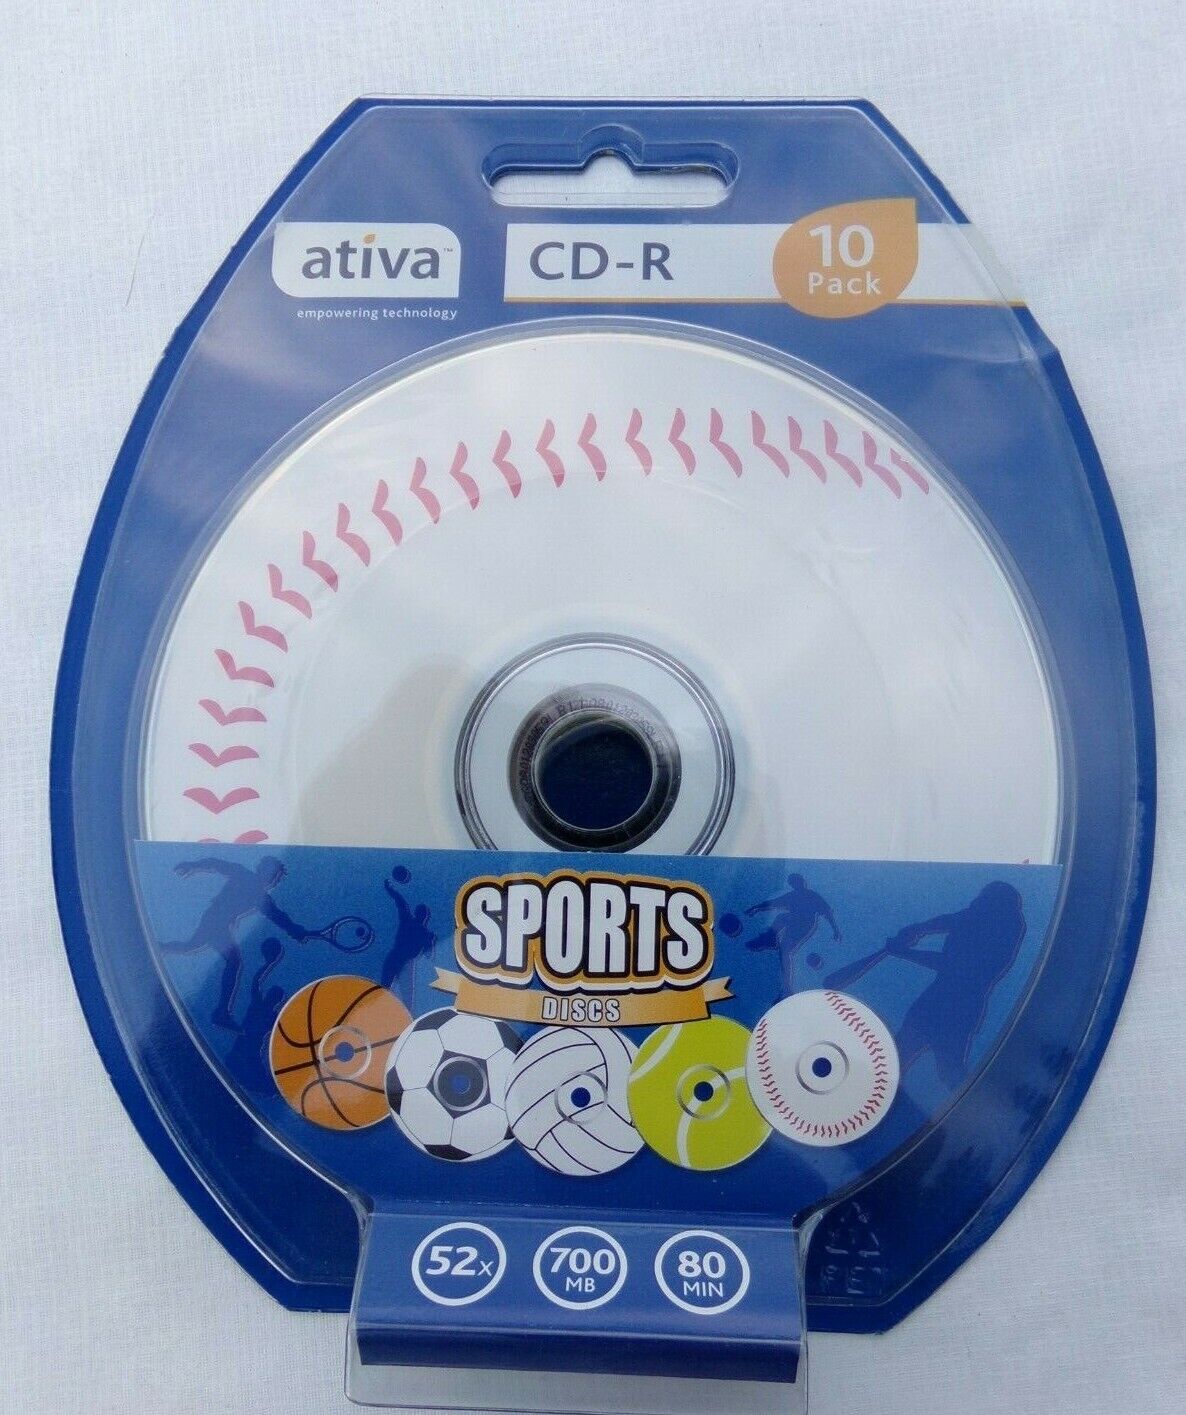 Ativa Soccer Sports Design 10 Pack 700MB / 80 Minute 52X CD-R / NEW SEALED